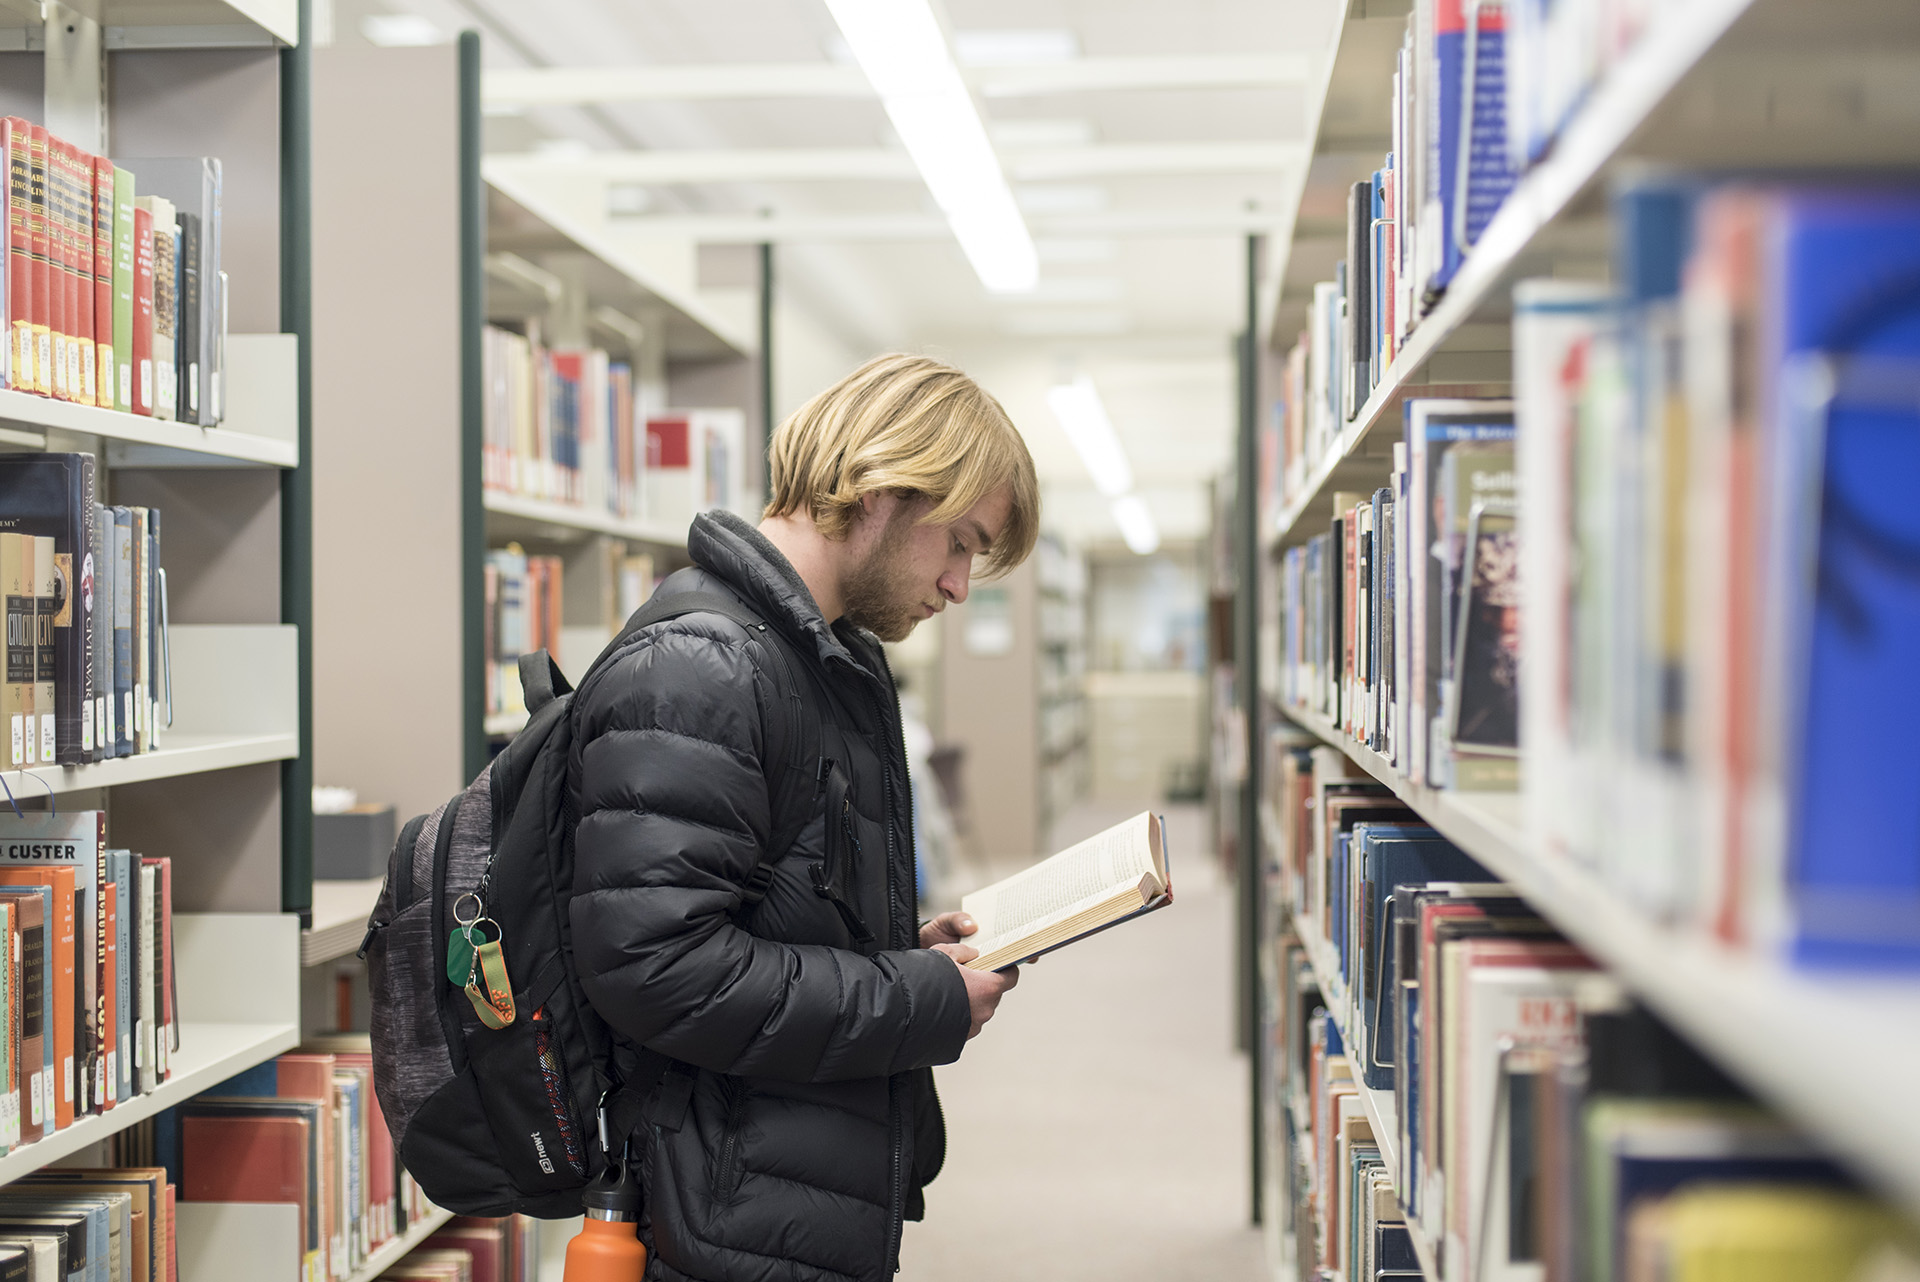 Student looking at books in Library rows.